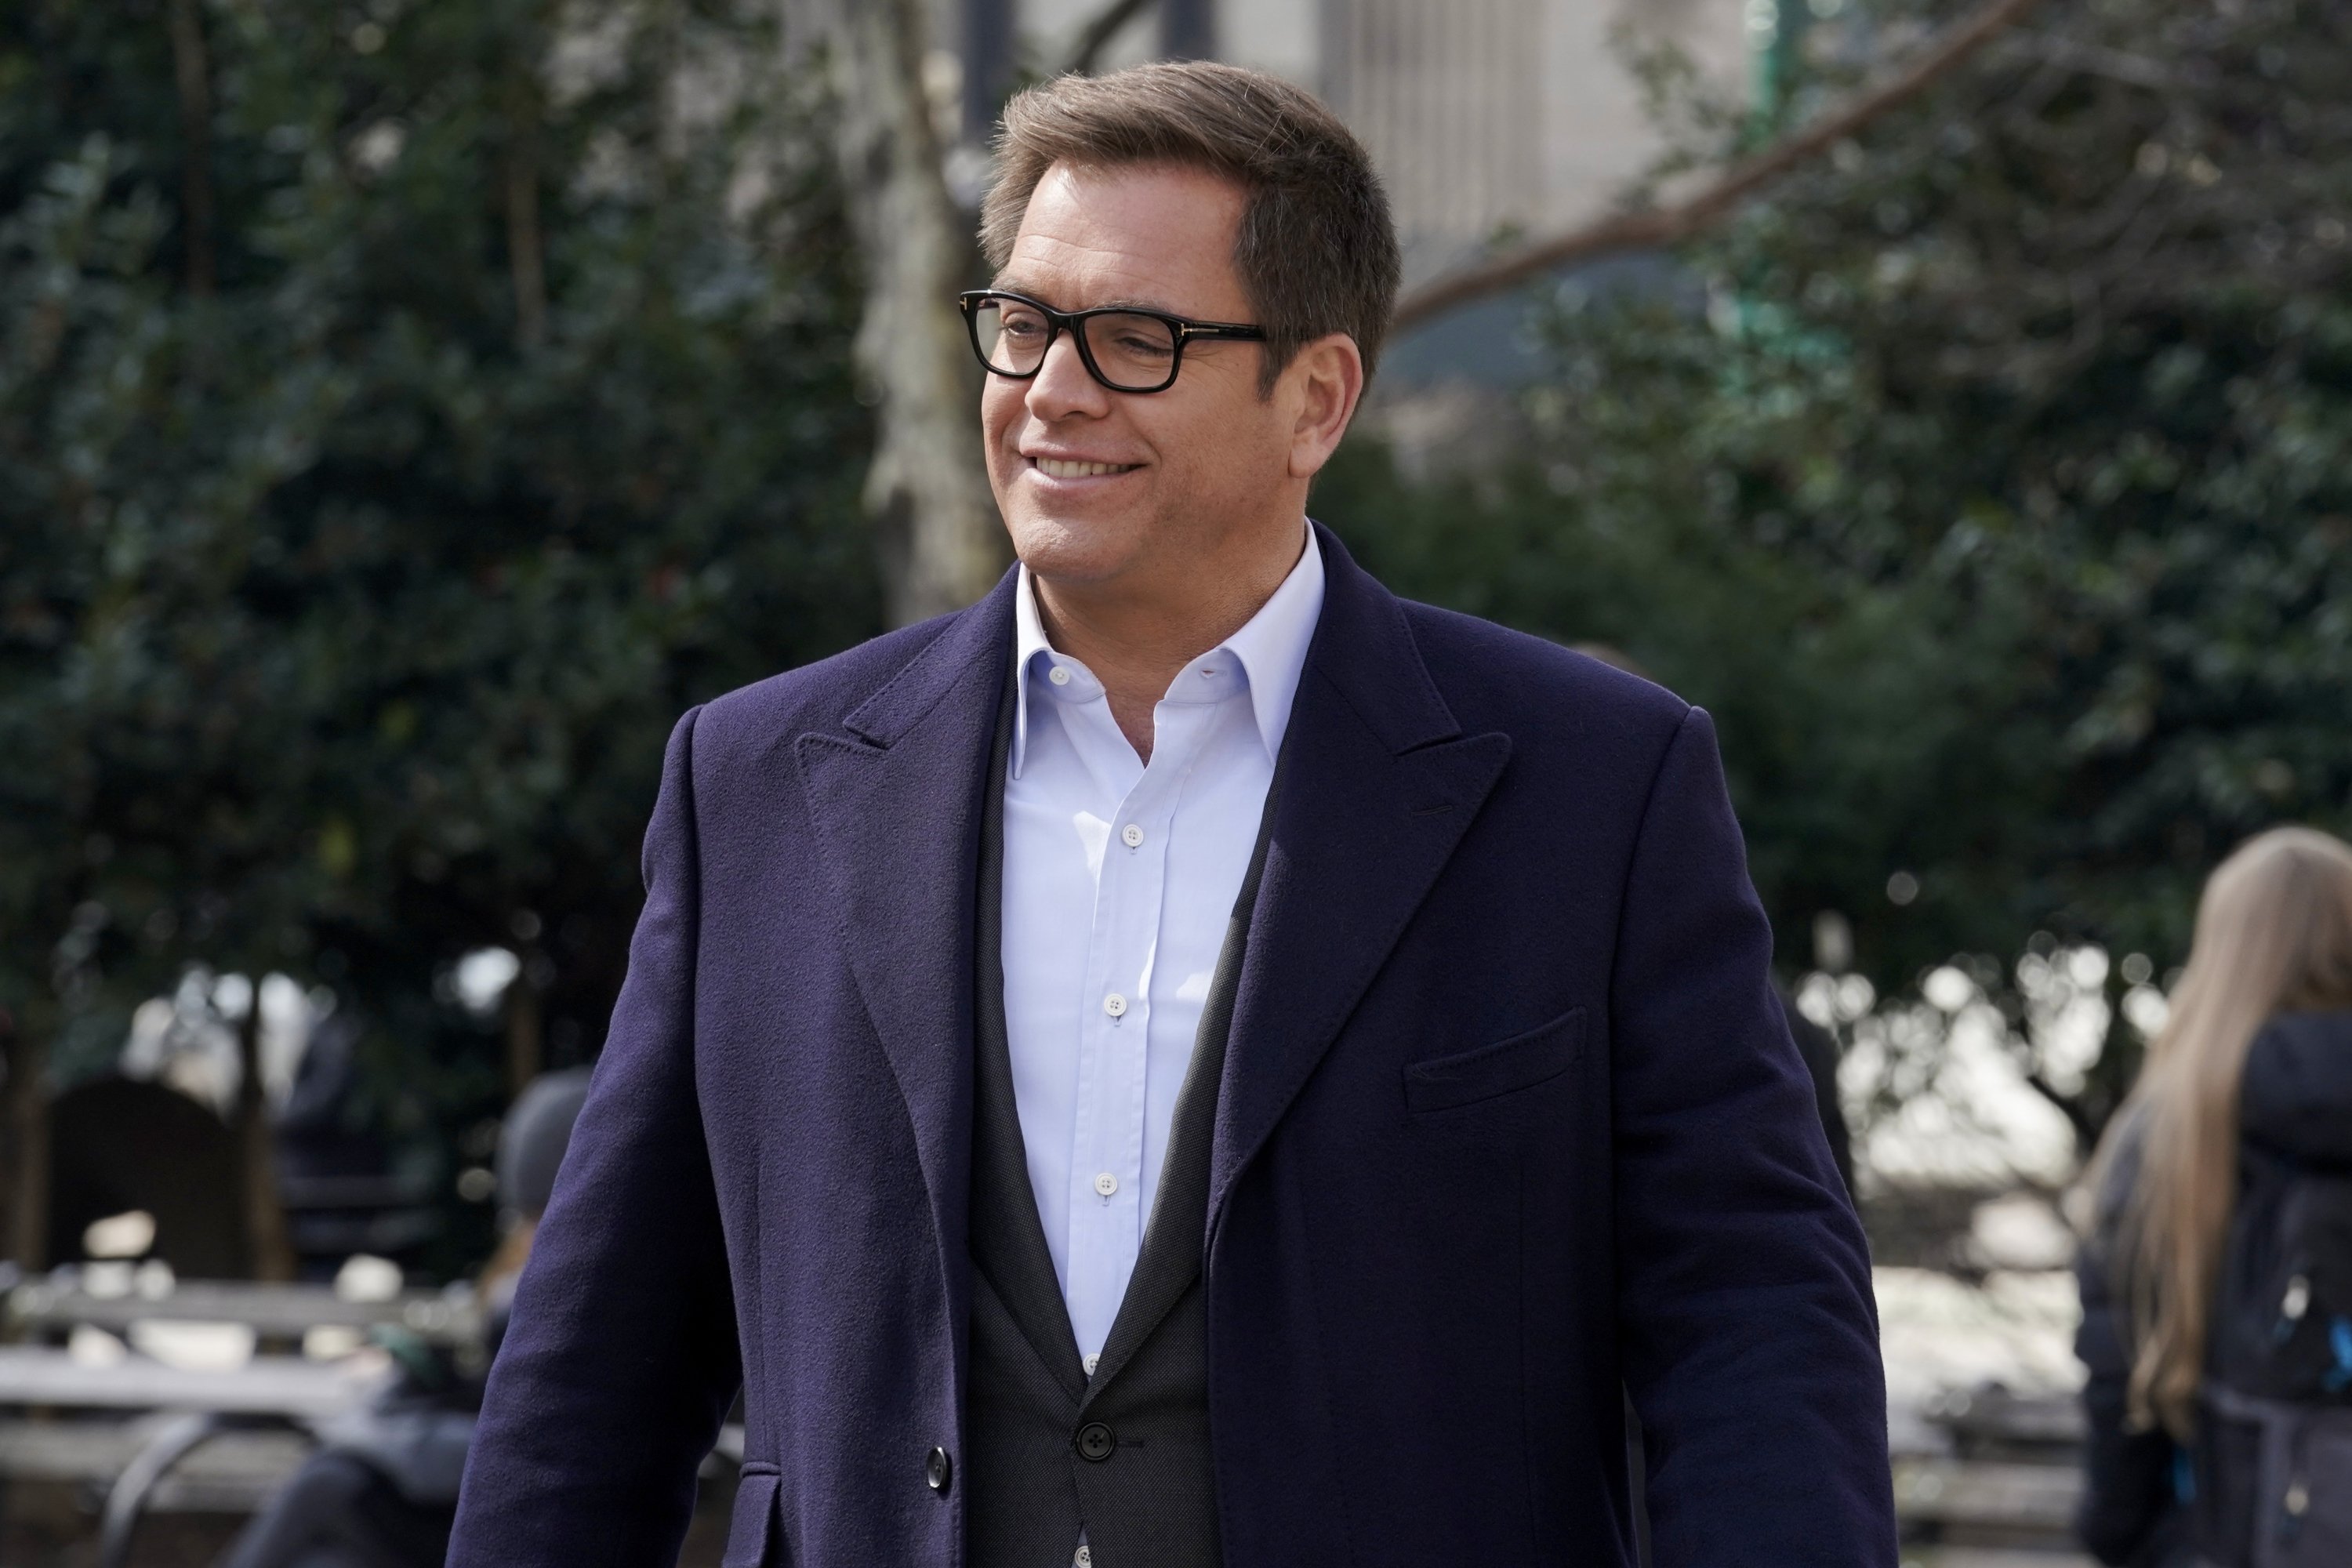 Michael Weatherly on the set of "Bull" | Source: Getty Images